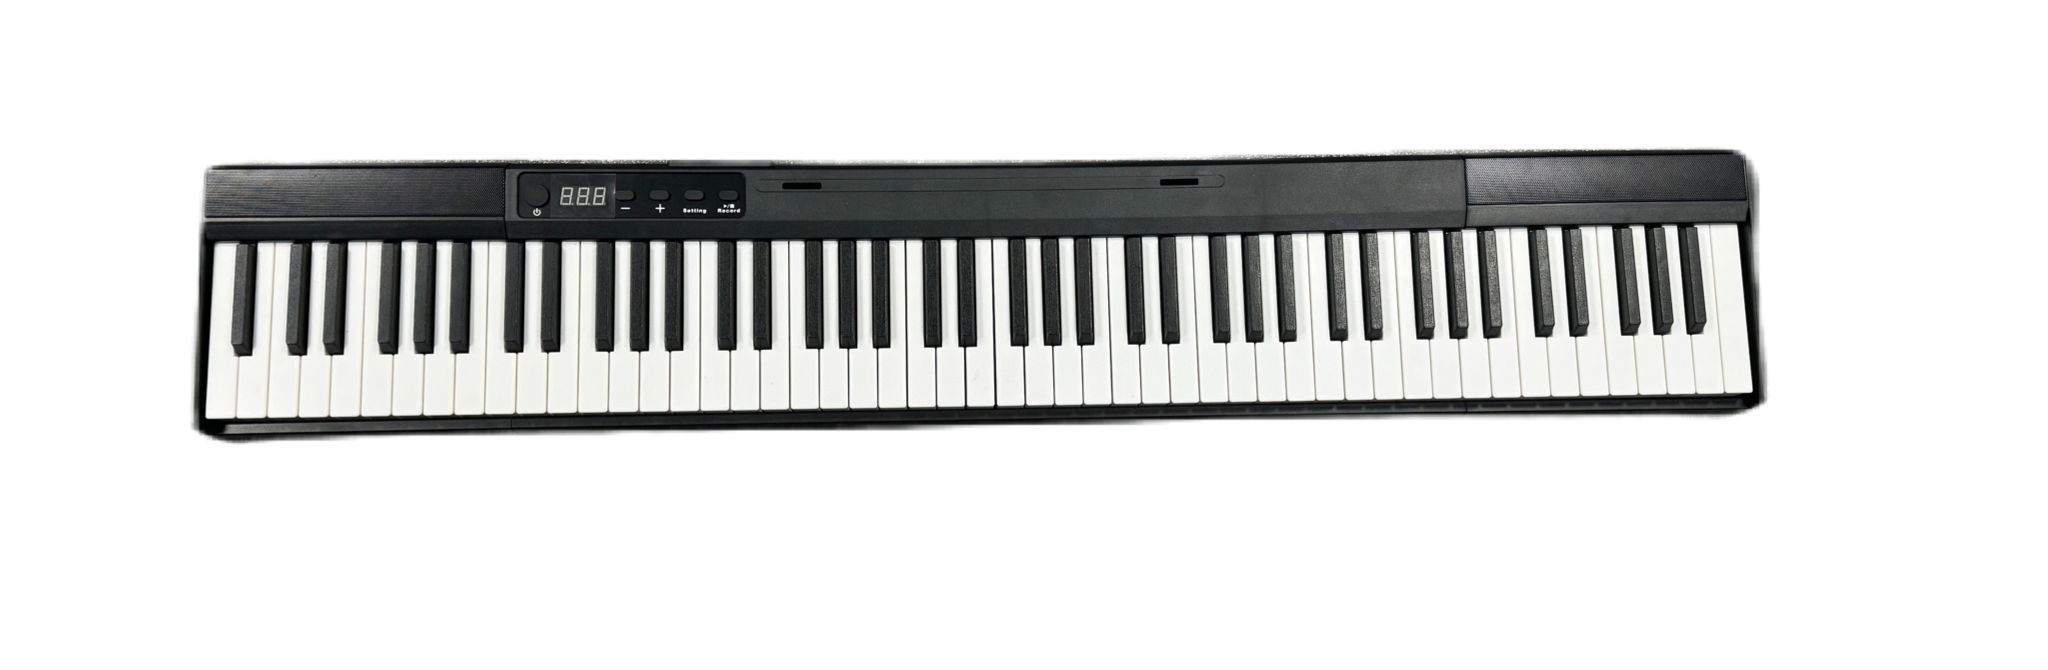 88-Key Electronic Keyboard with Storage Bag for Kids and Adults